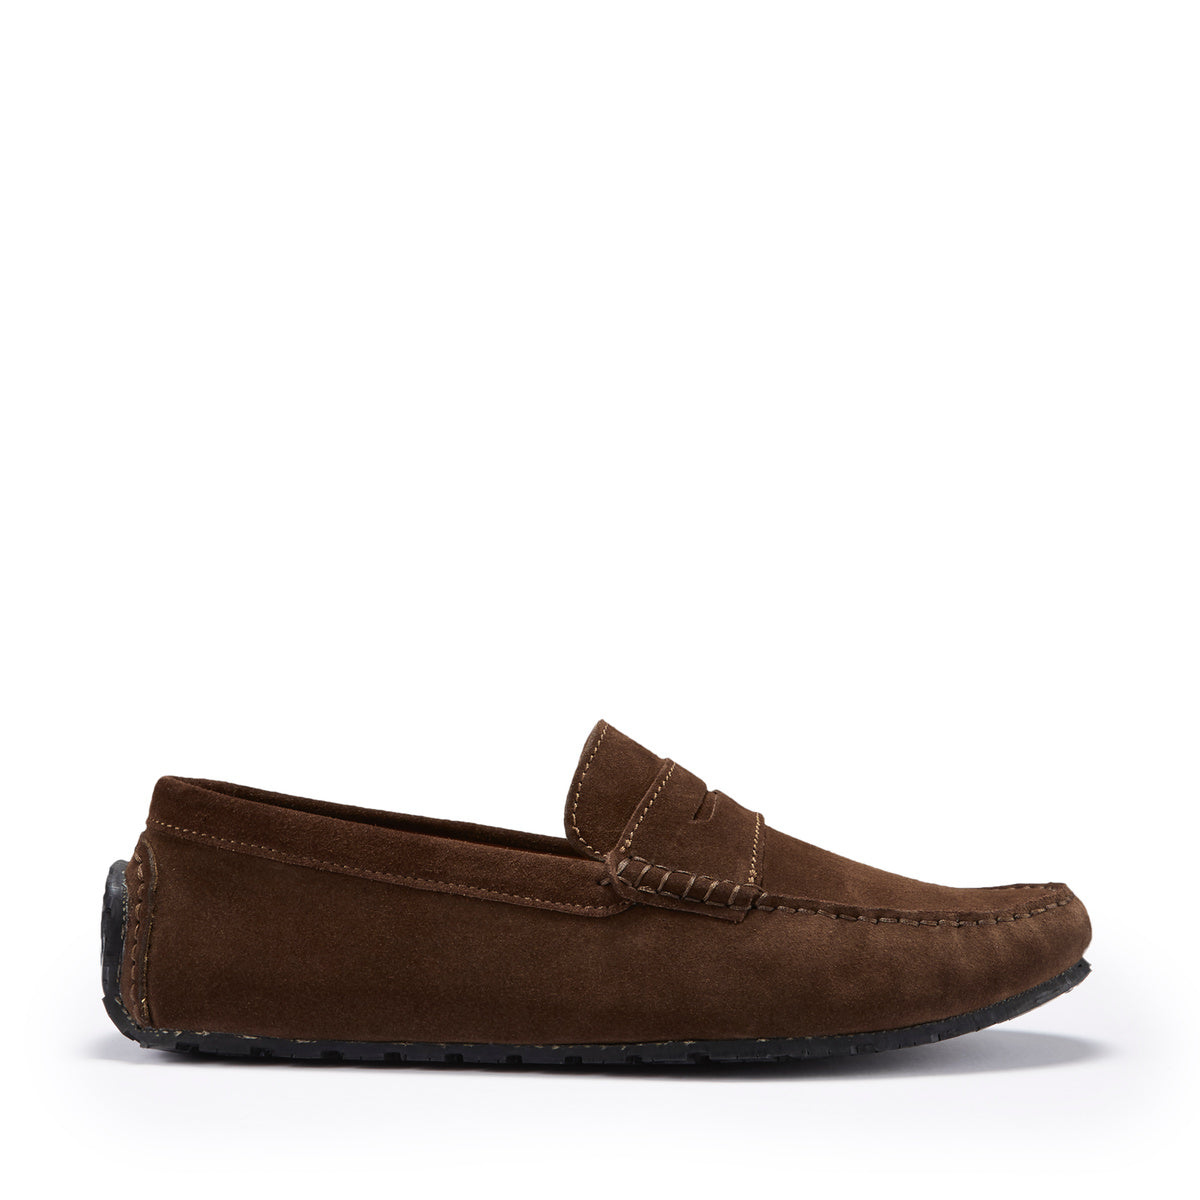 Tyre Sole Penny Driving Loafers, brown suede